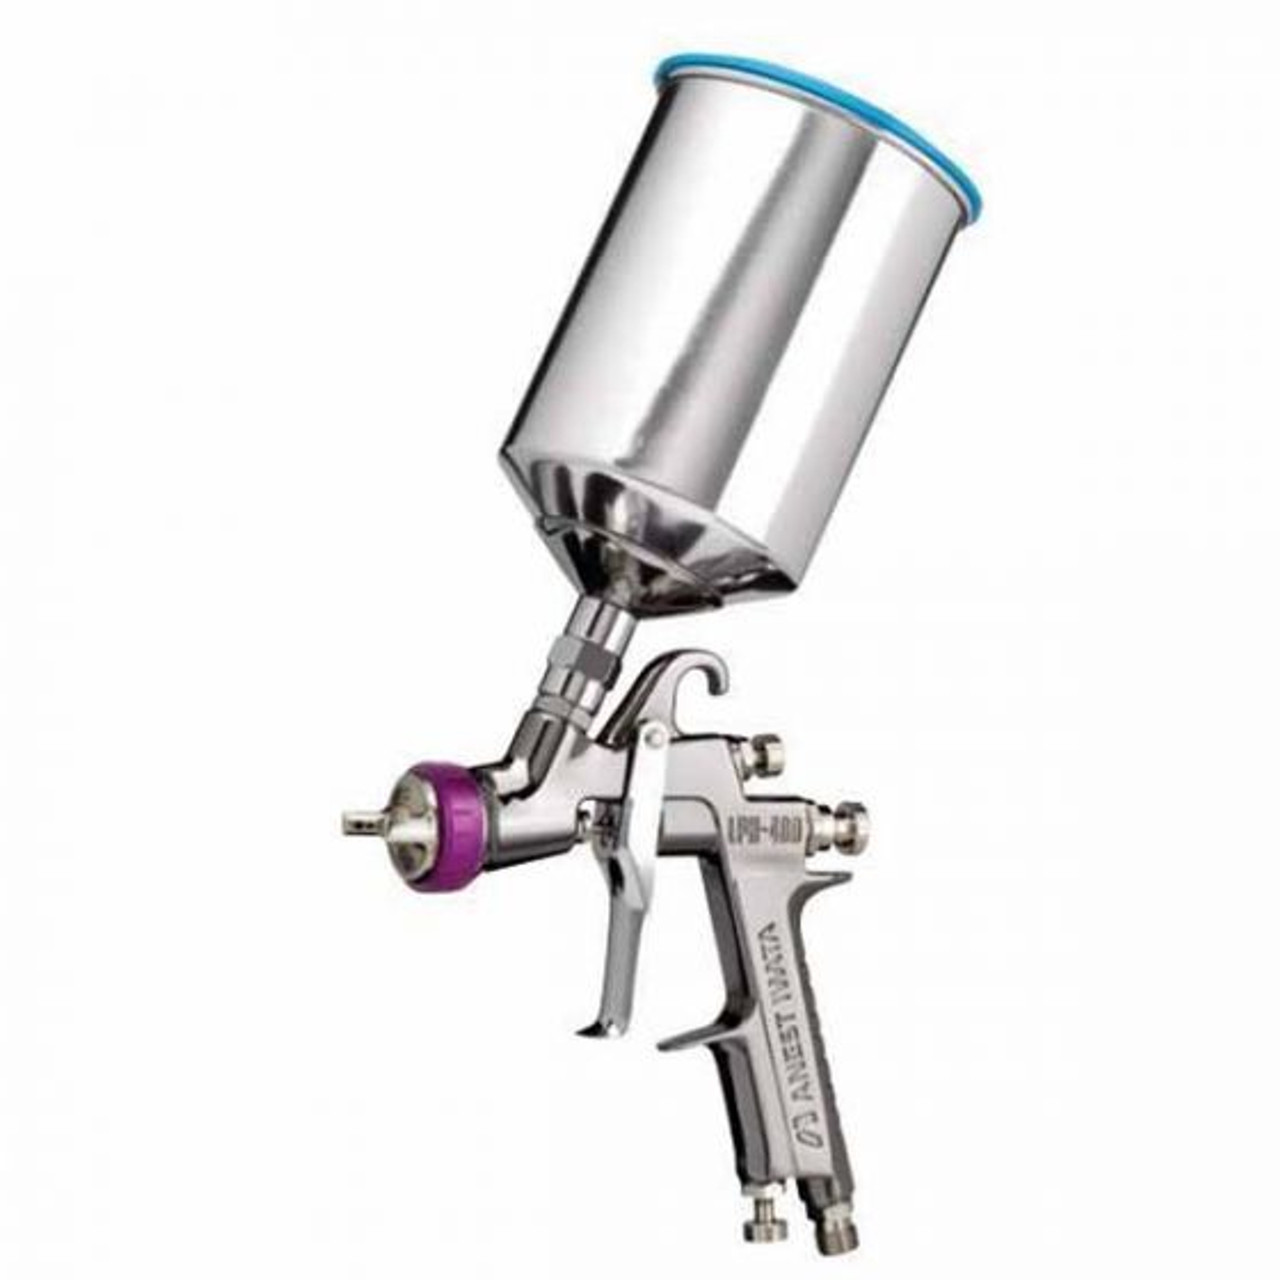 ANEST IWATA 5713 LPH400-LVB Series HVLP Gravity Feed Spray Gun with Cup, 1.5 mm Nozzle, 1000 mL Capacity